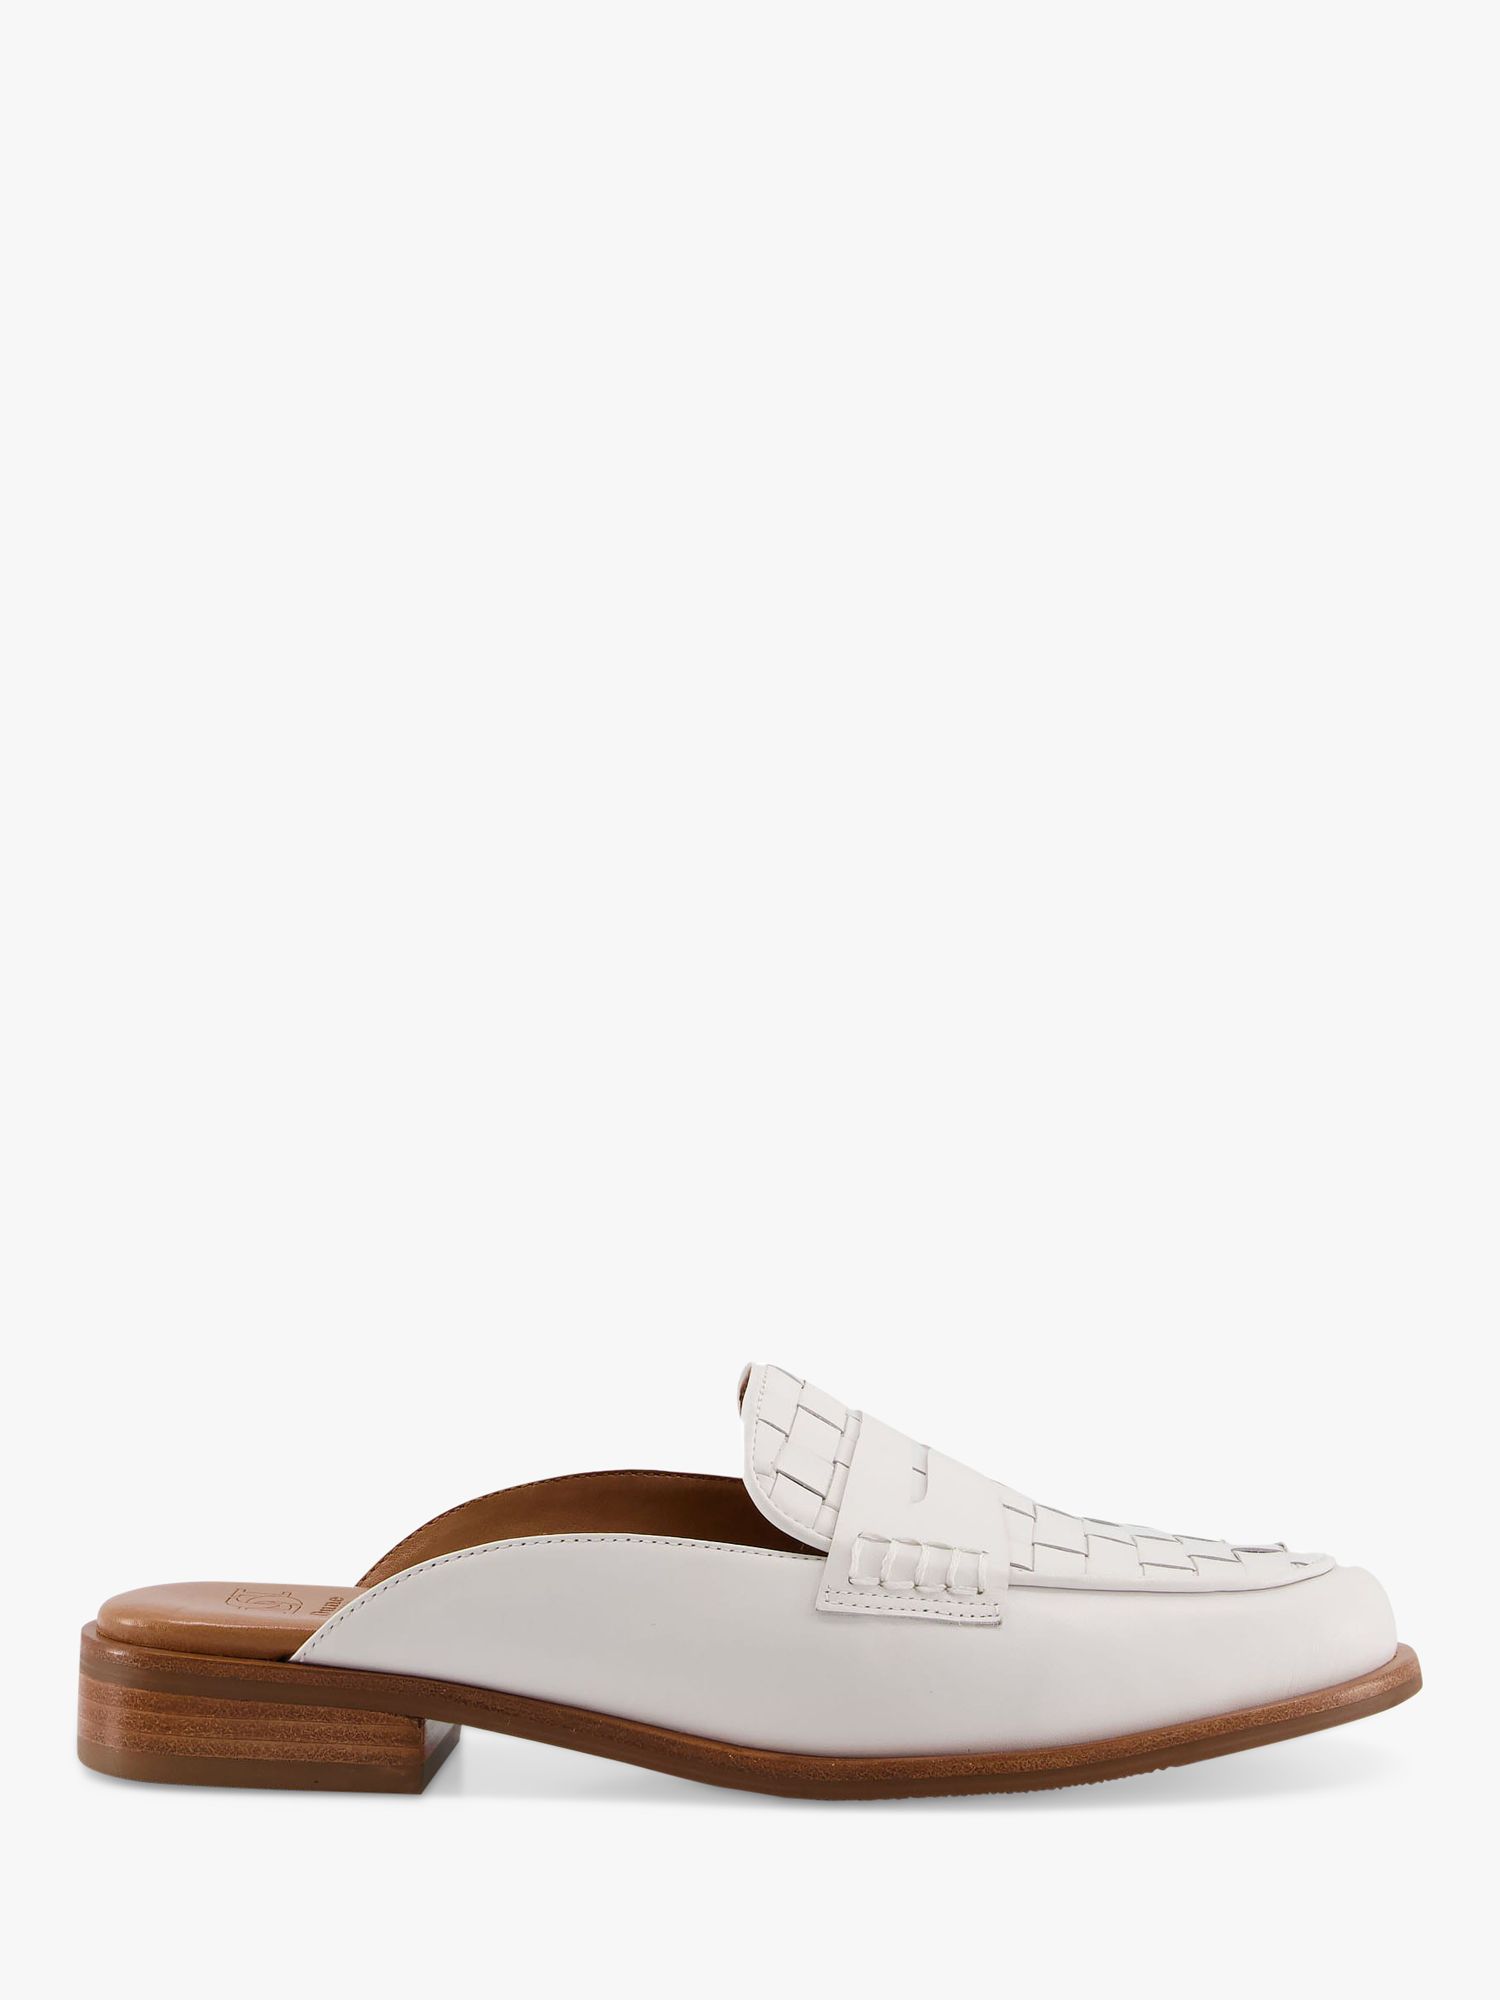 Dune Gradient Leather Backless Loafers, White at John Lewis & Partners